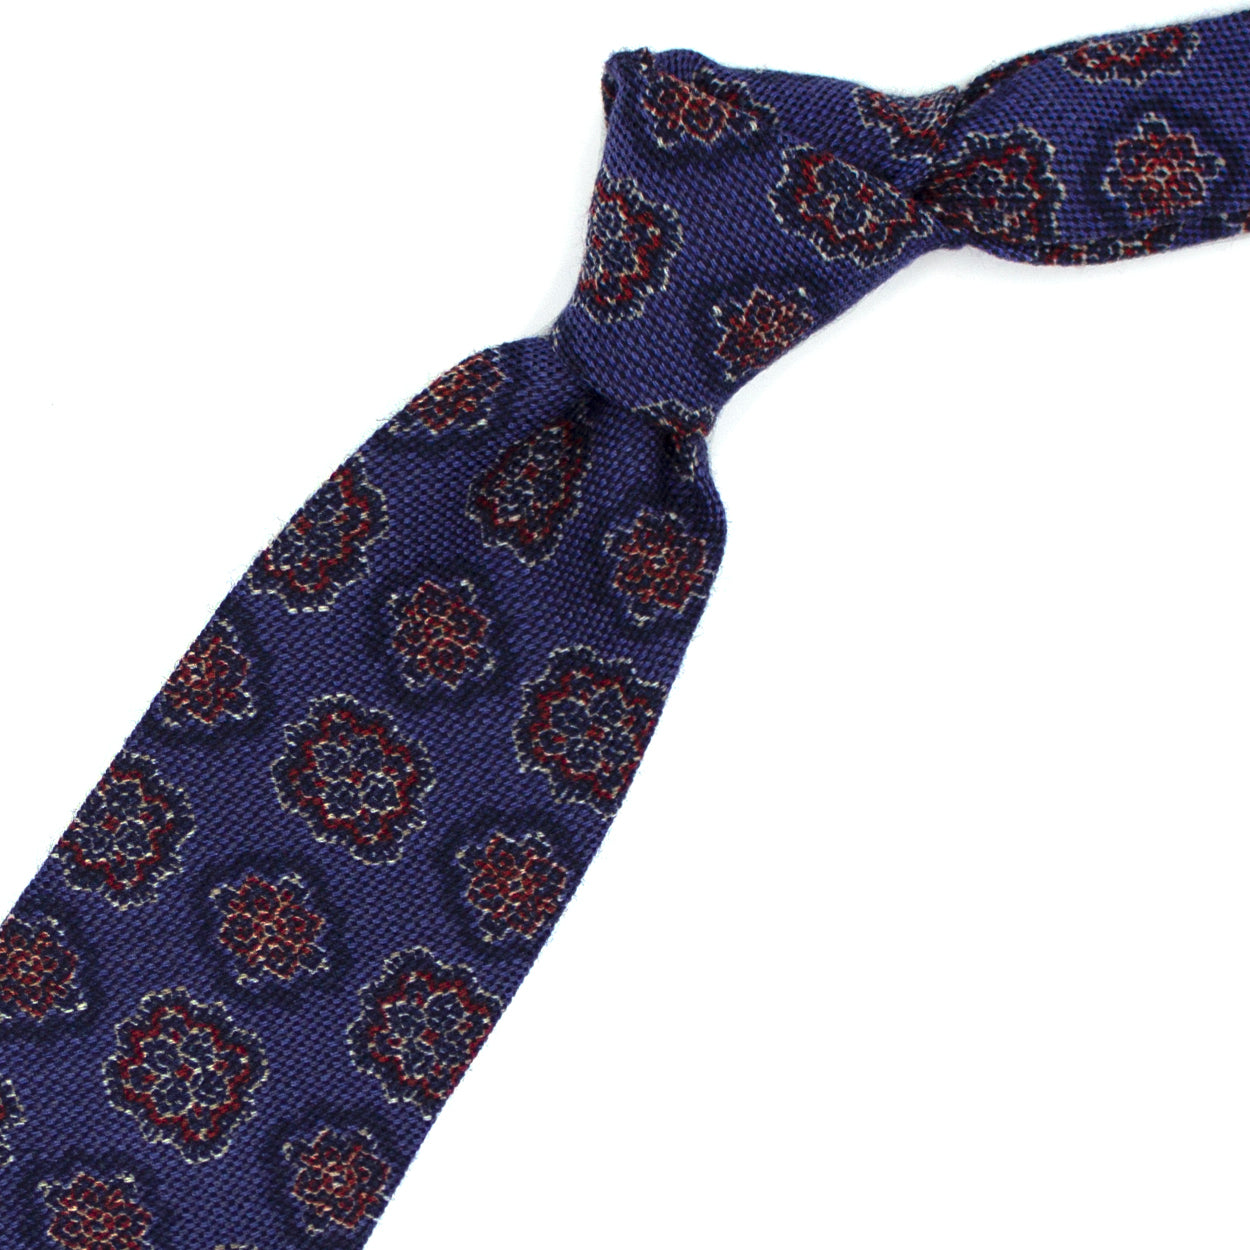 Blue tie with blue and red medallions